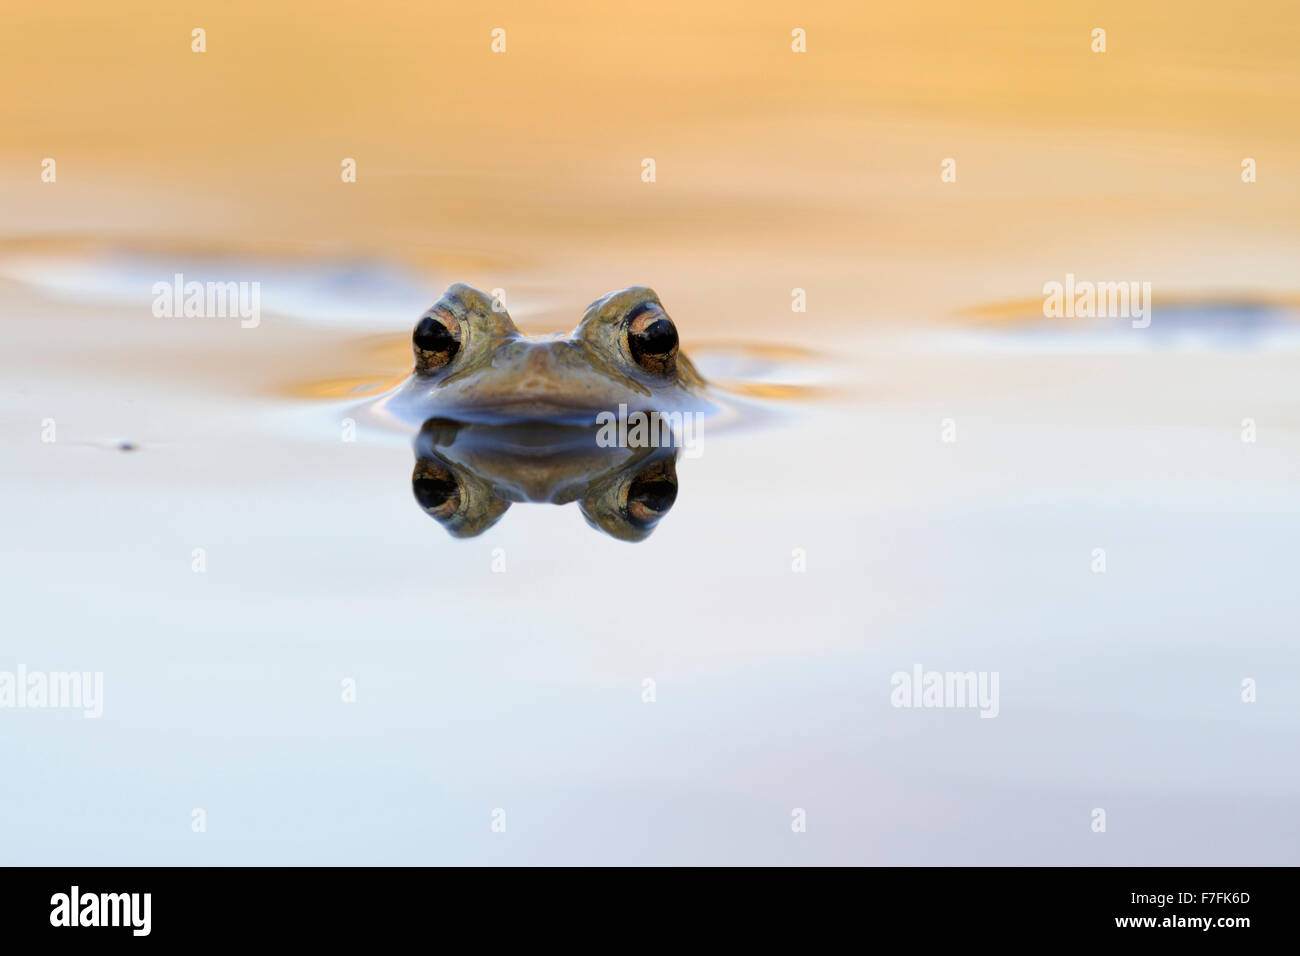 Common Toad / Erdkröte ( Bufo bufo ) floats in nice colored water, beautiful toad eyes reflects / reflective on water surface. Stock Photo